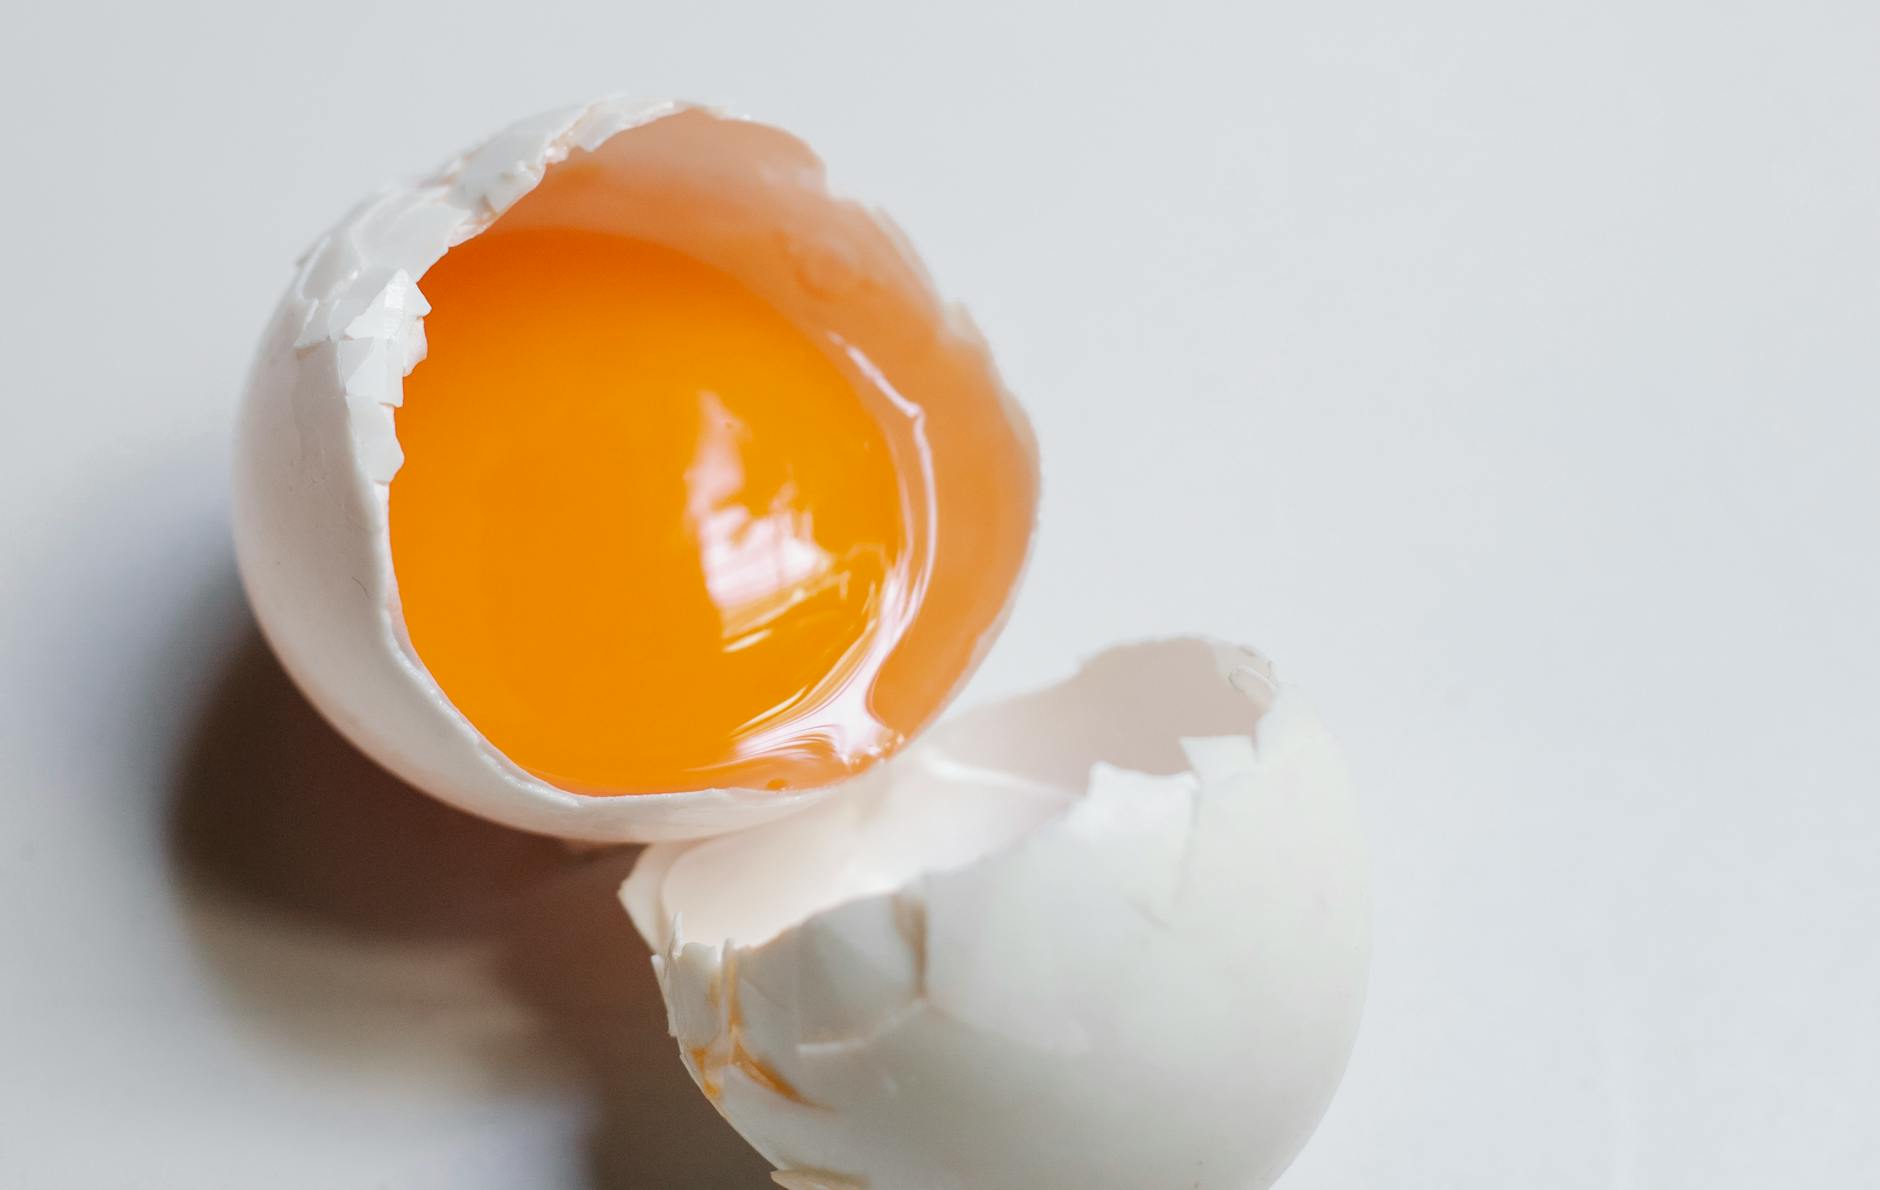 Top view of broken raw egg with yellow yolk and white eggshell on white background in light kitchen during cooking process